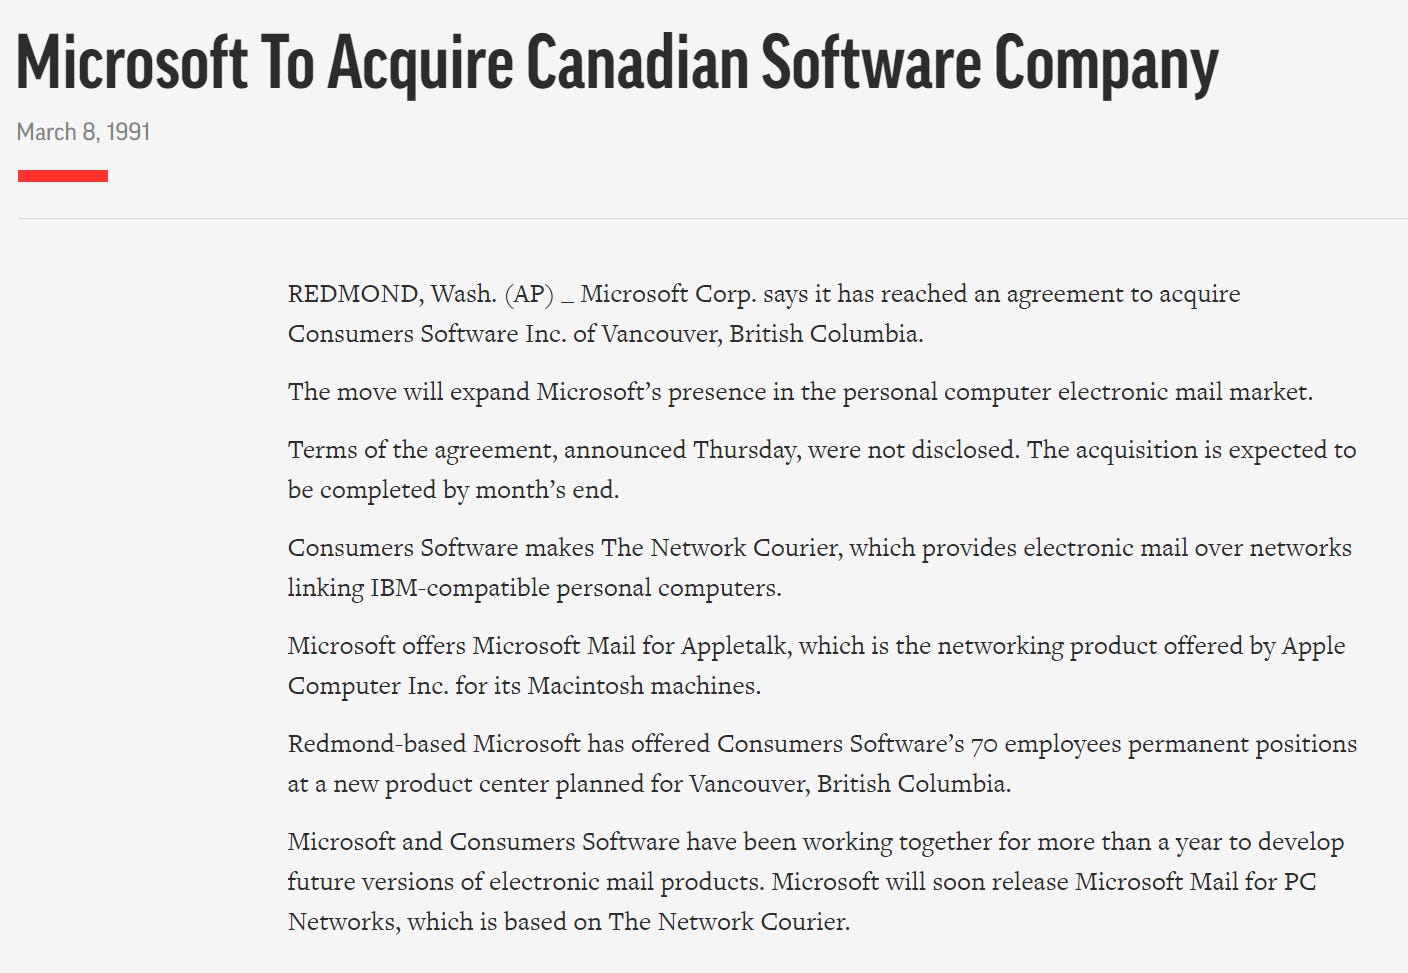 Microsoft to acquire Canadian Software Company - Network Courier